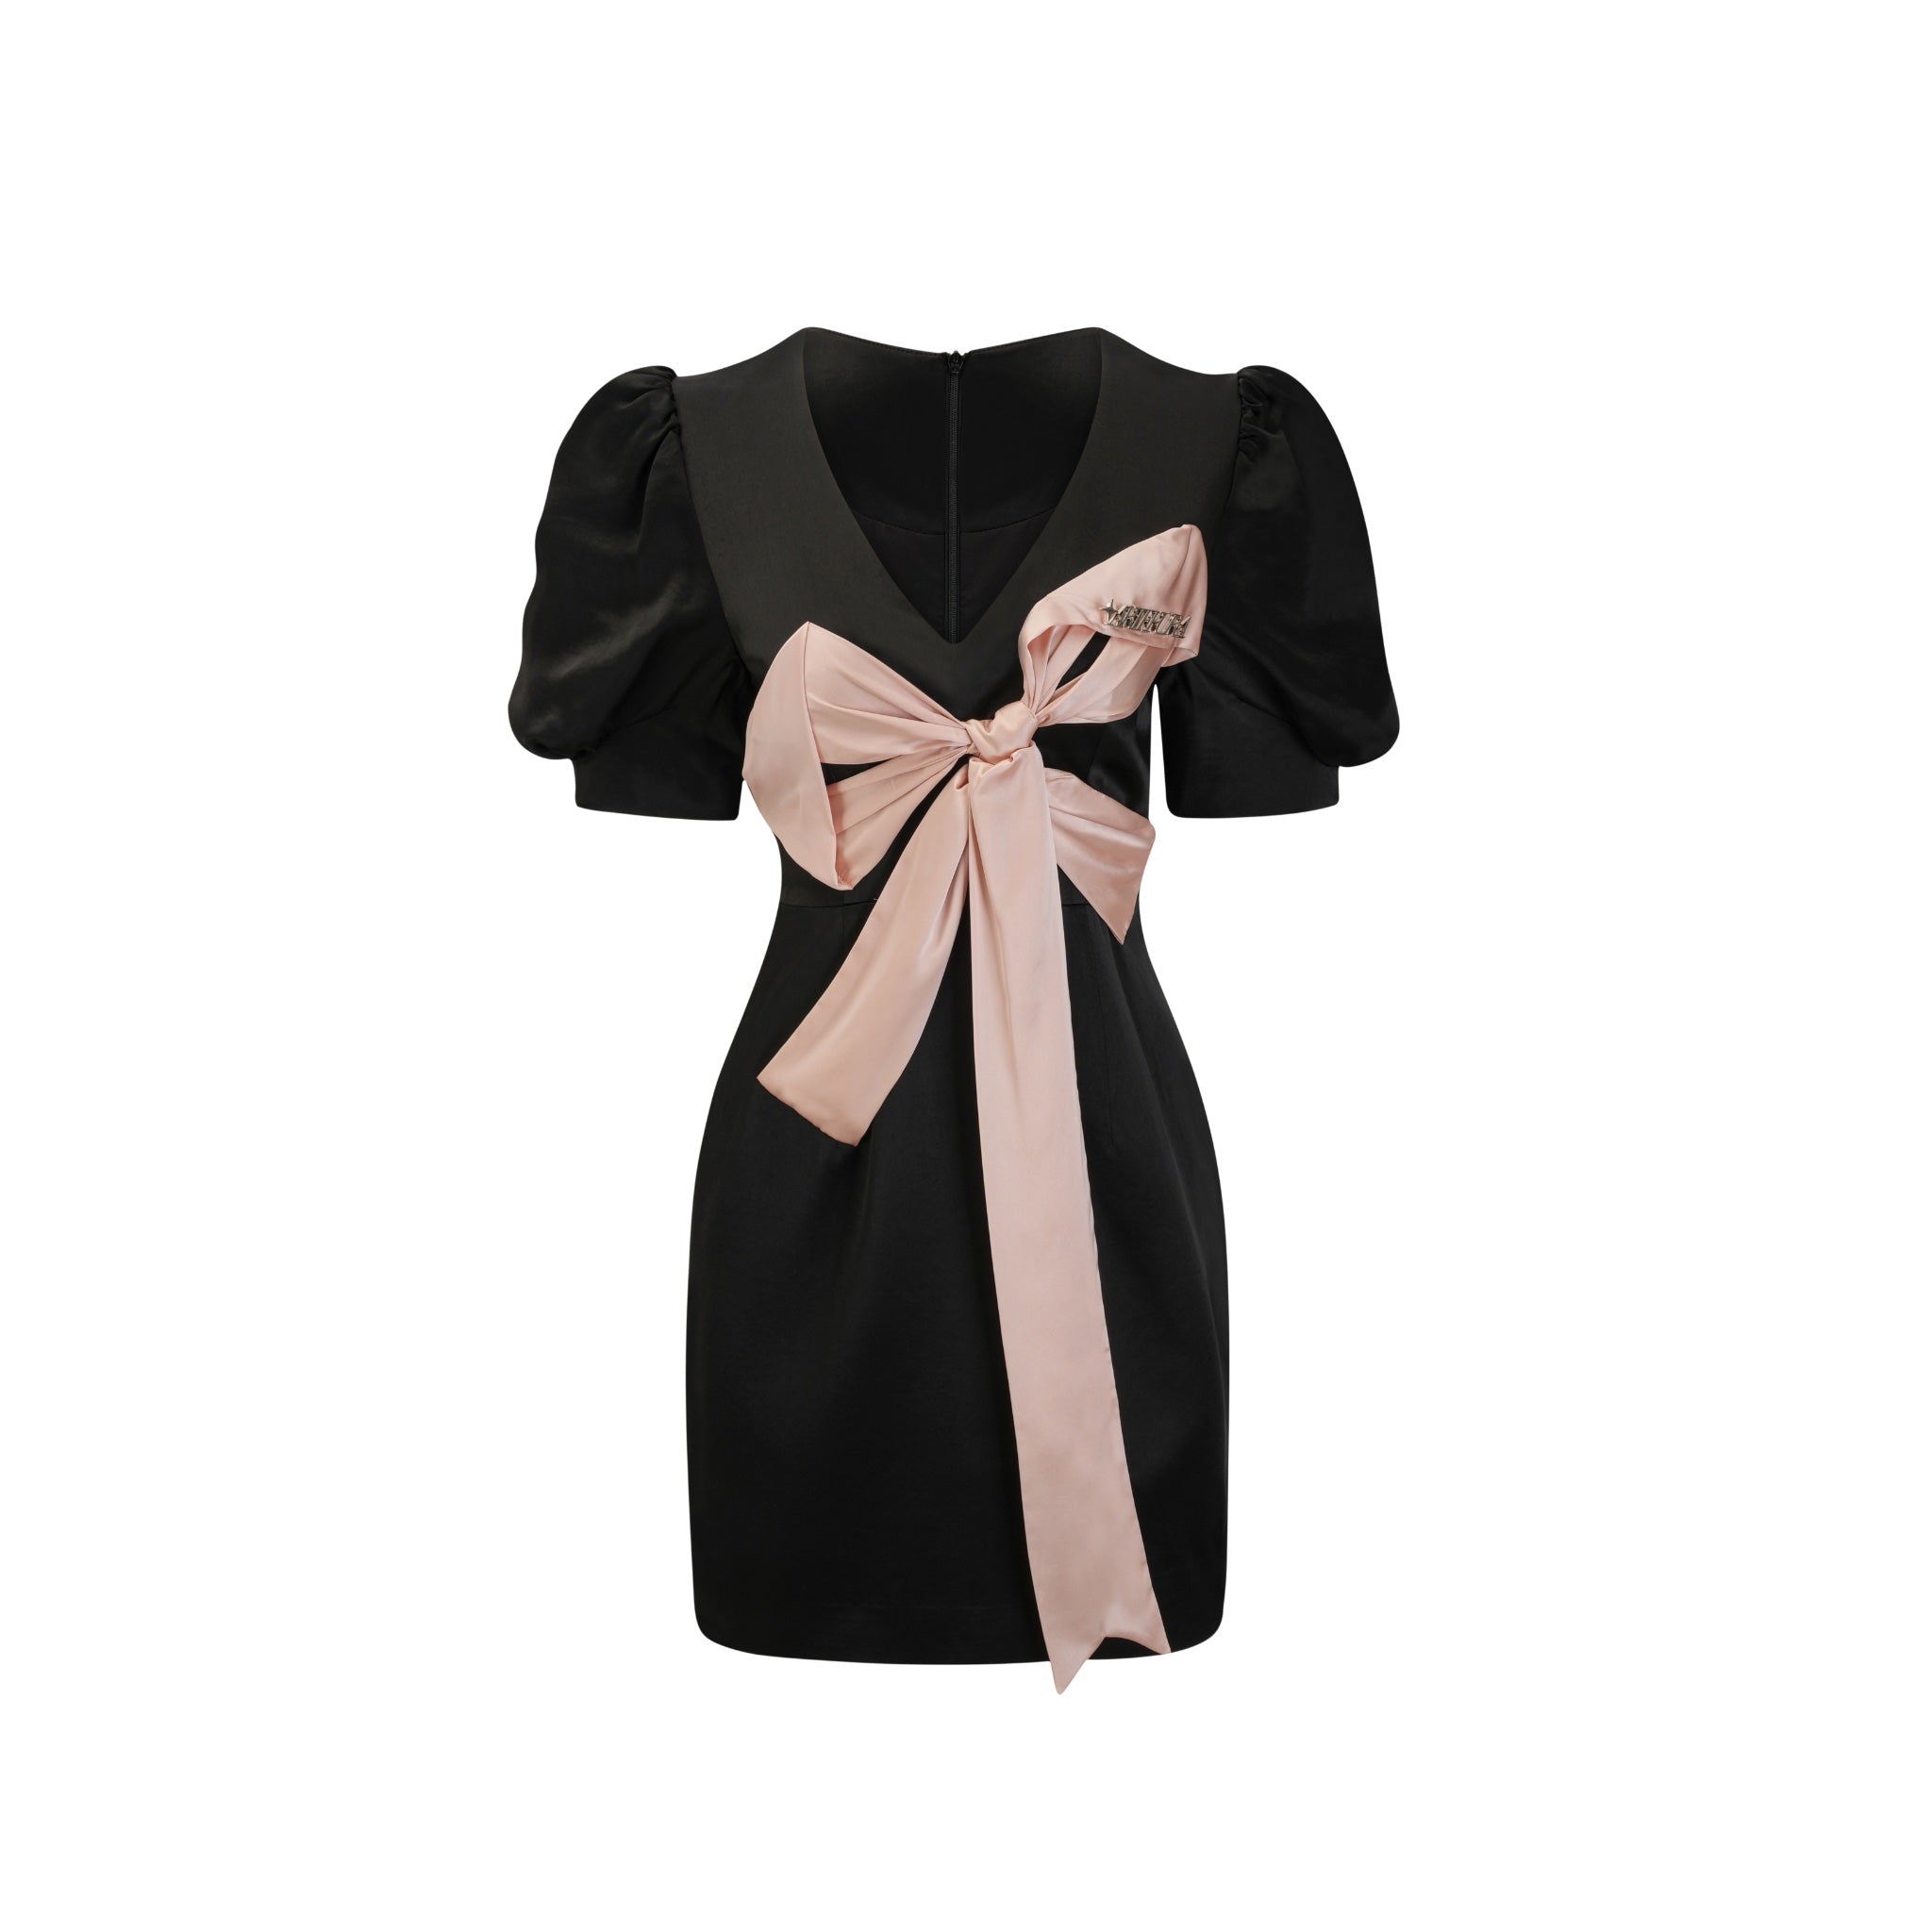 ARTE PURA Black Acetate Dress With Pink Bow Tie In Front | MADA IN CHINA